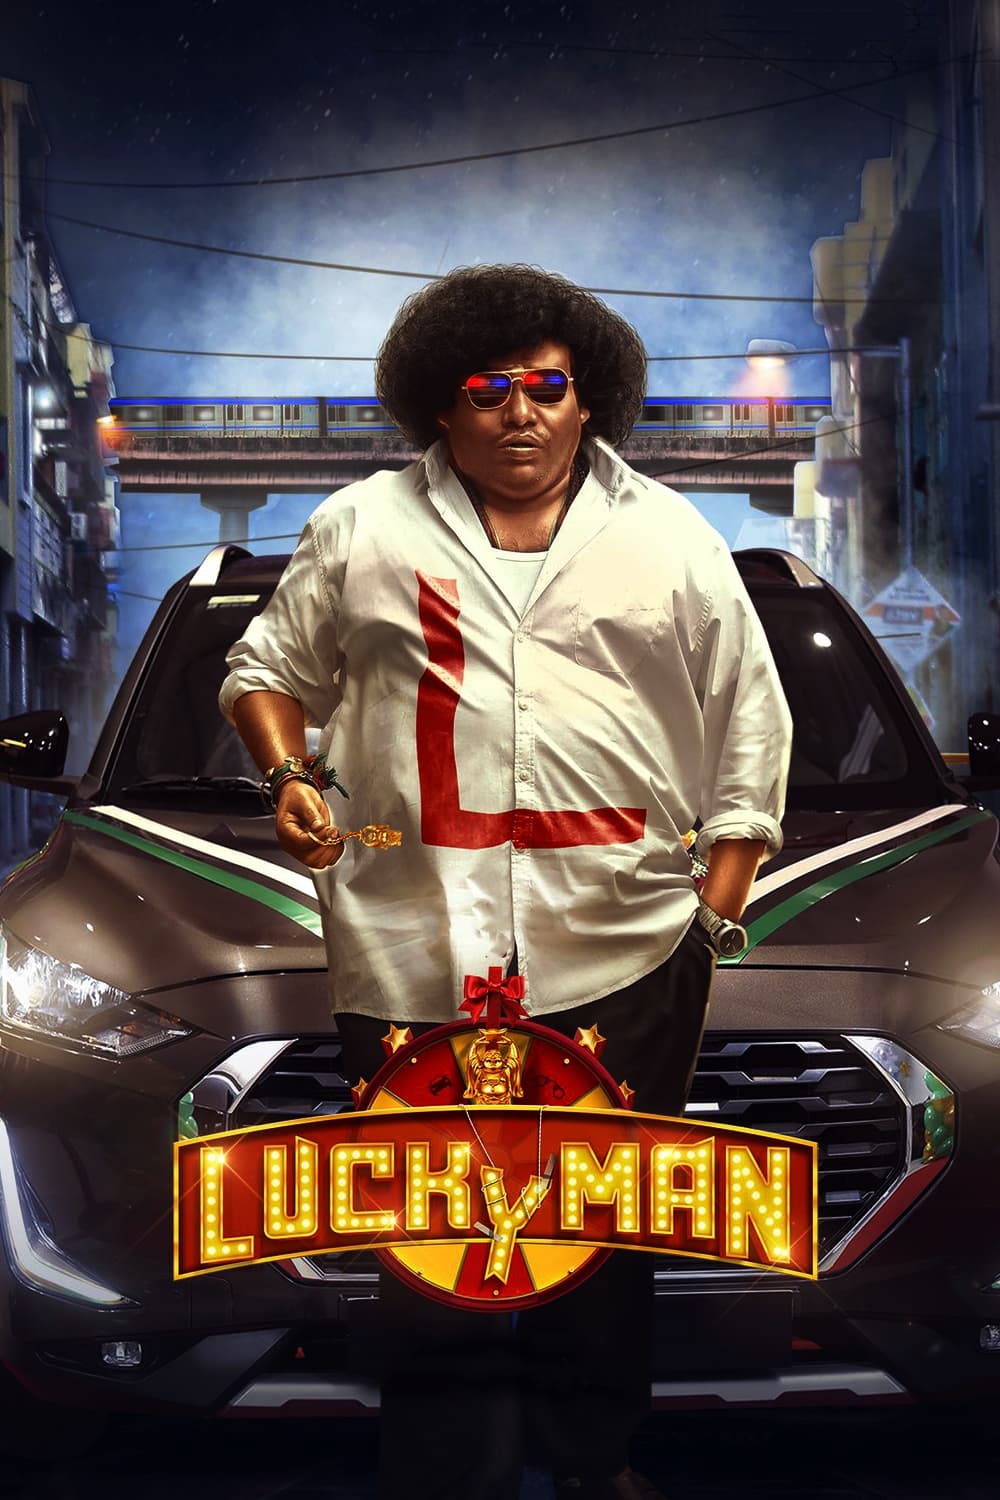 Poster for the movie "Lucky Man"